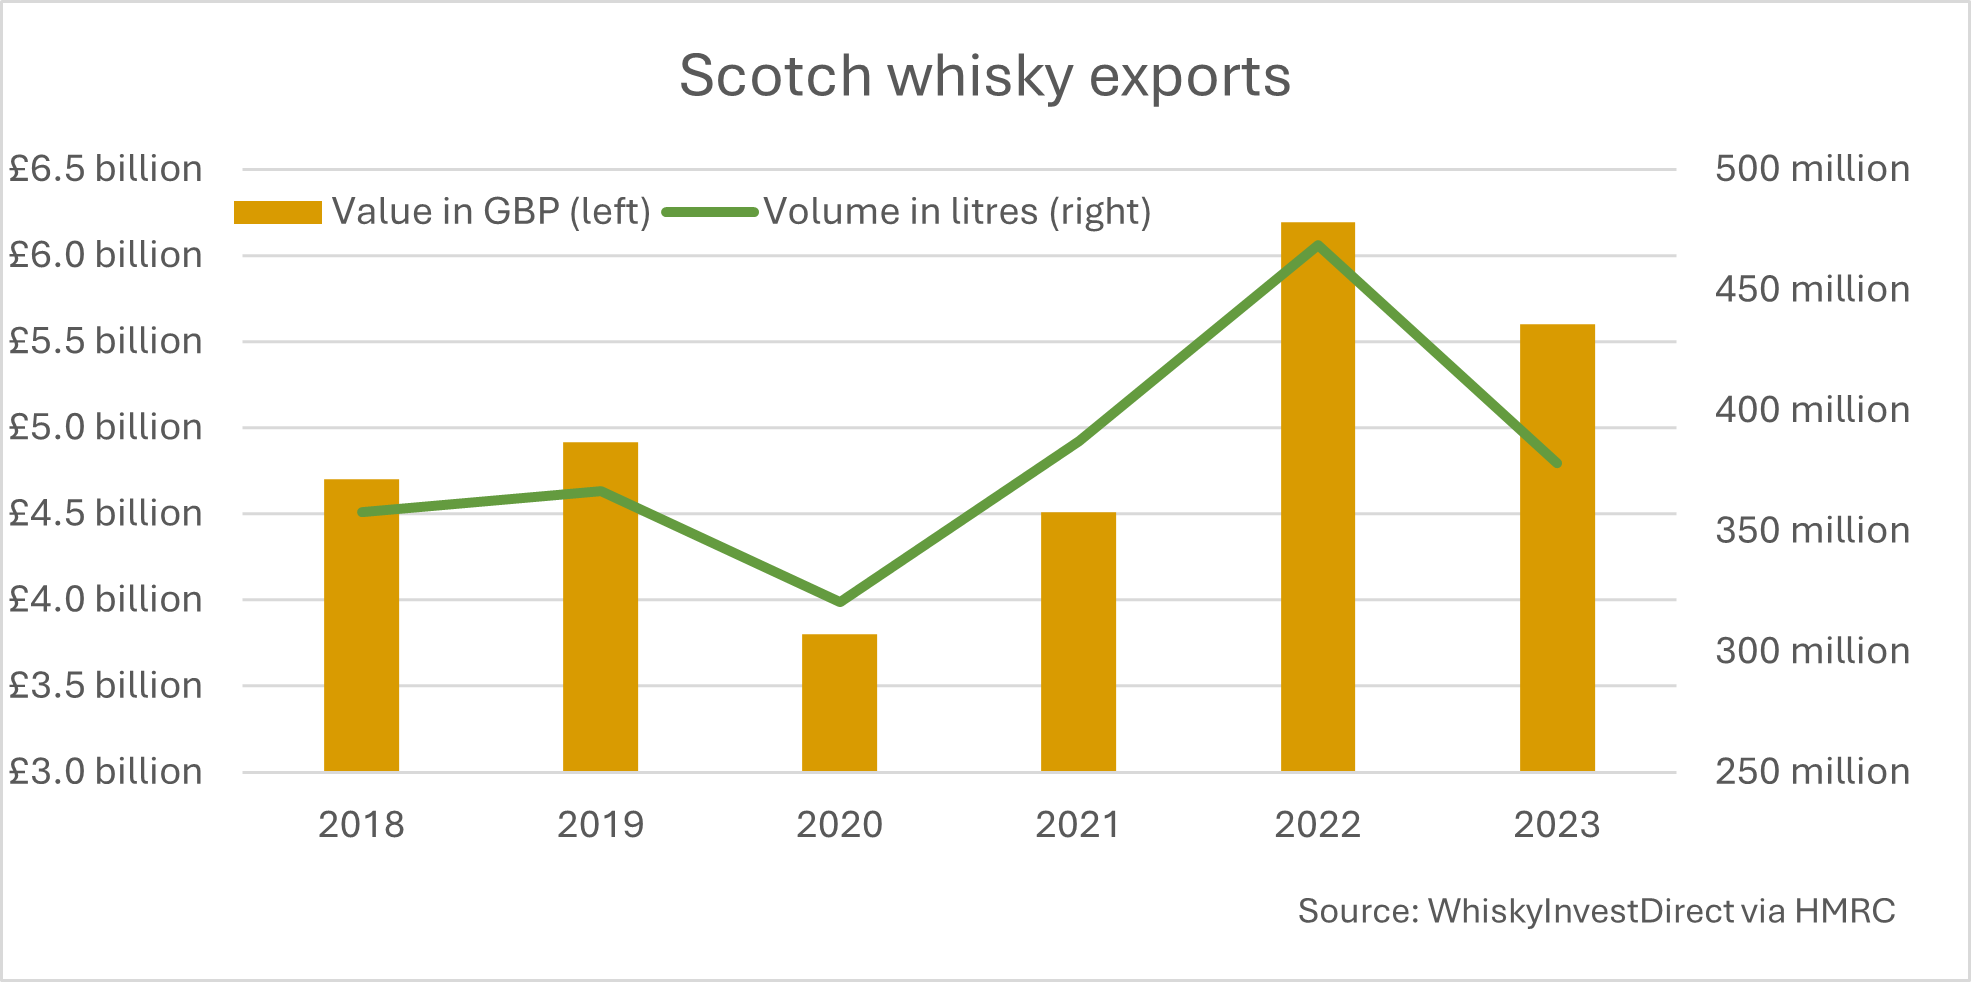 A graph showing annual export figures of Scotch whisky by value and volume, 2018-2023